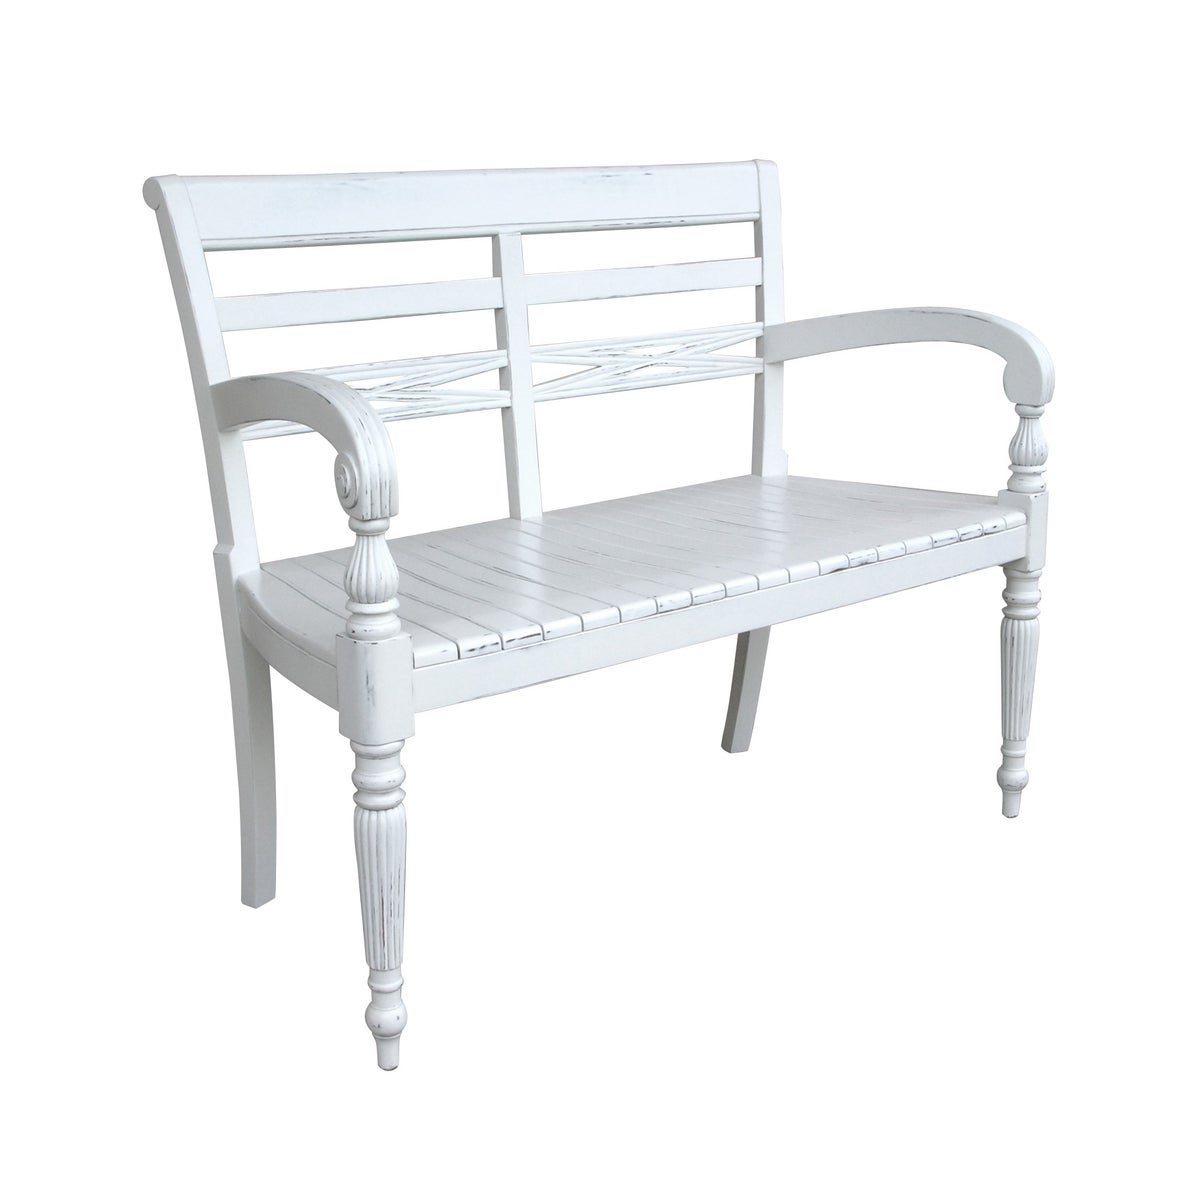 BENCH WHT - TRADEWINDS - accents & accessories Furniture RAFFLES |